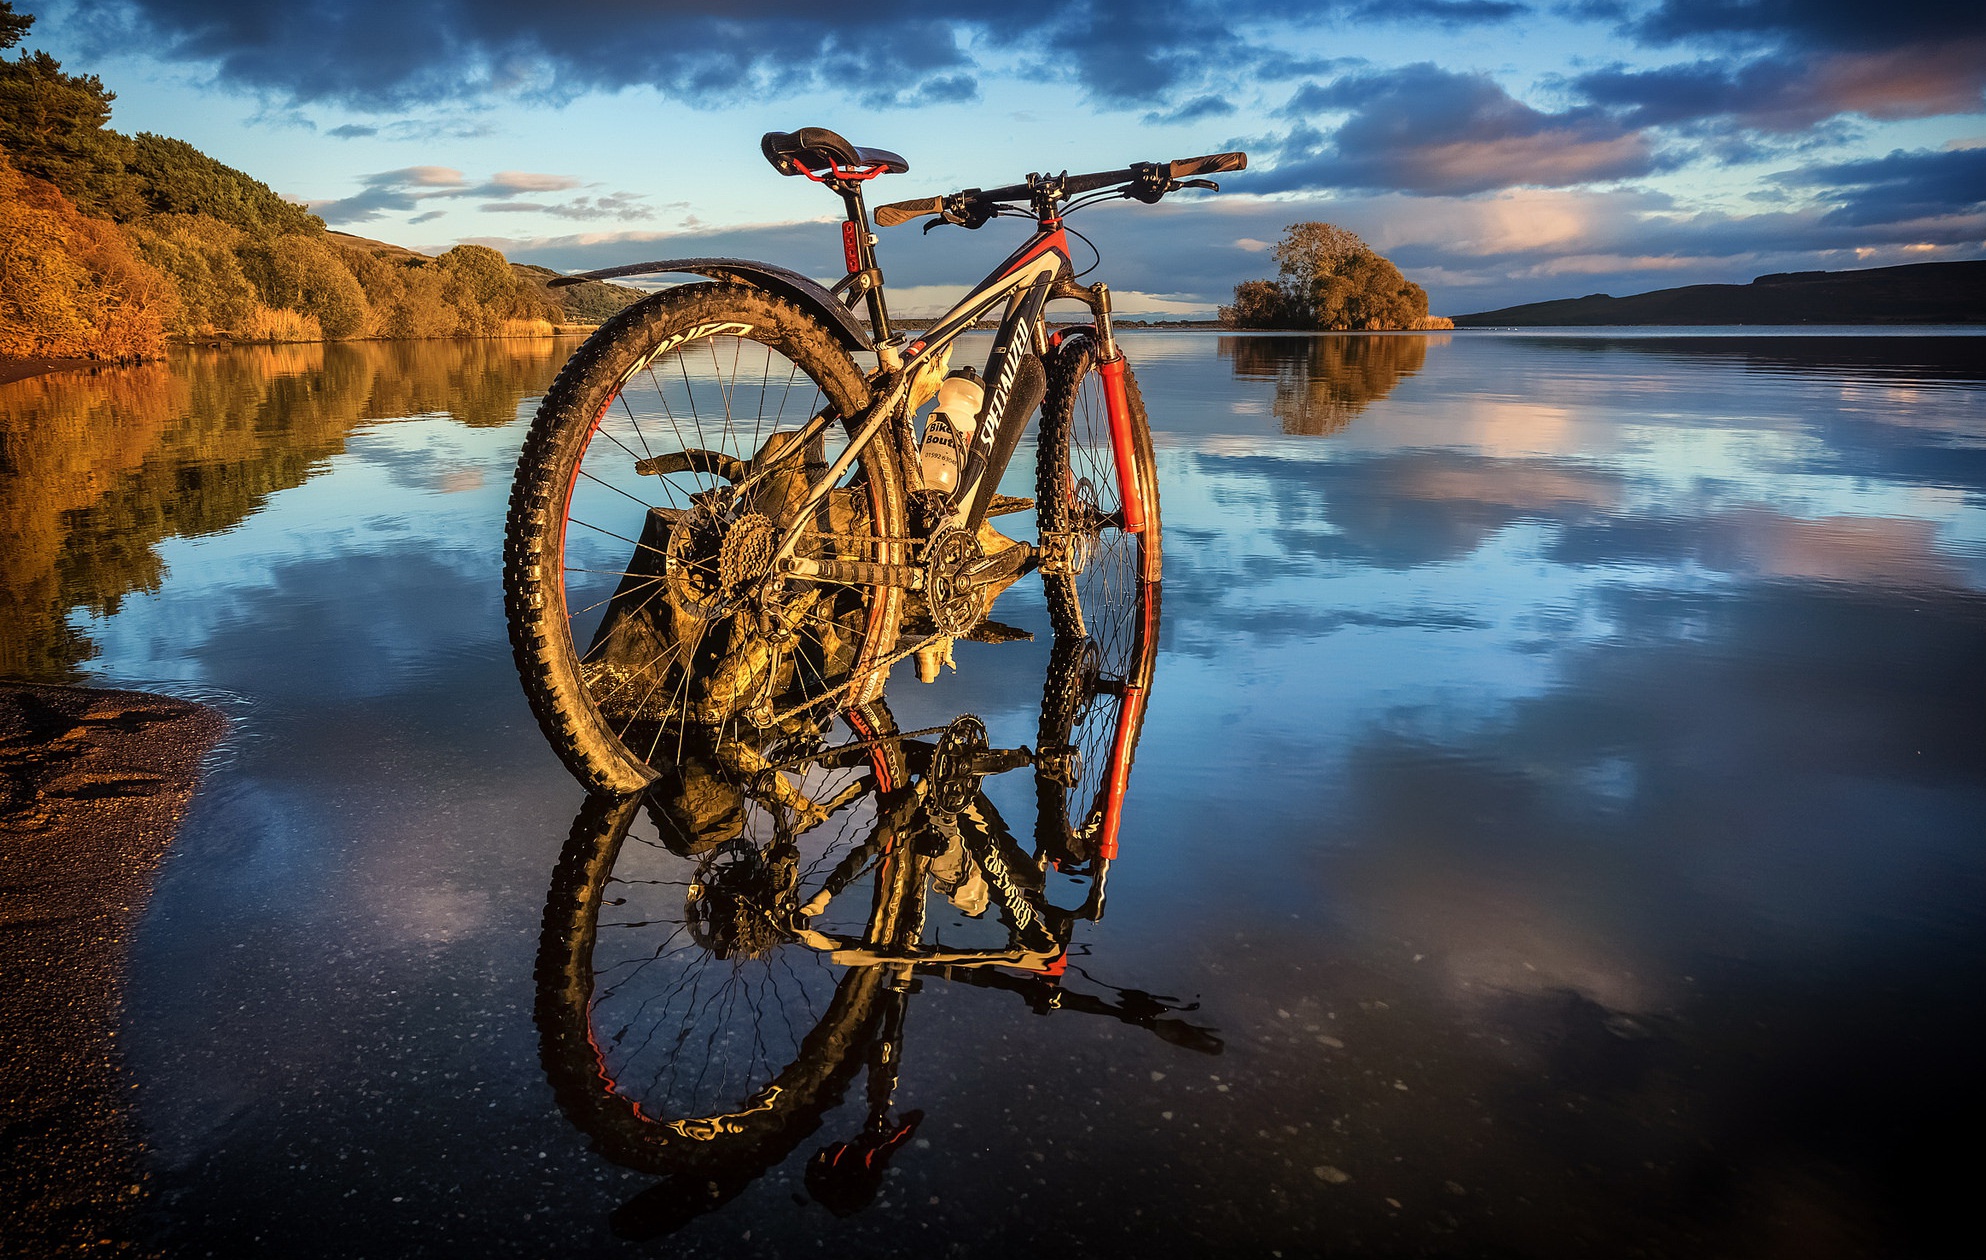 General 1986x1260 bicycle vehicle water nature reflection